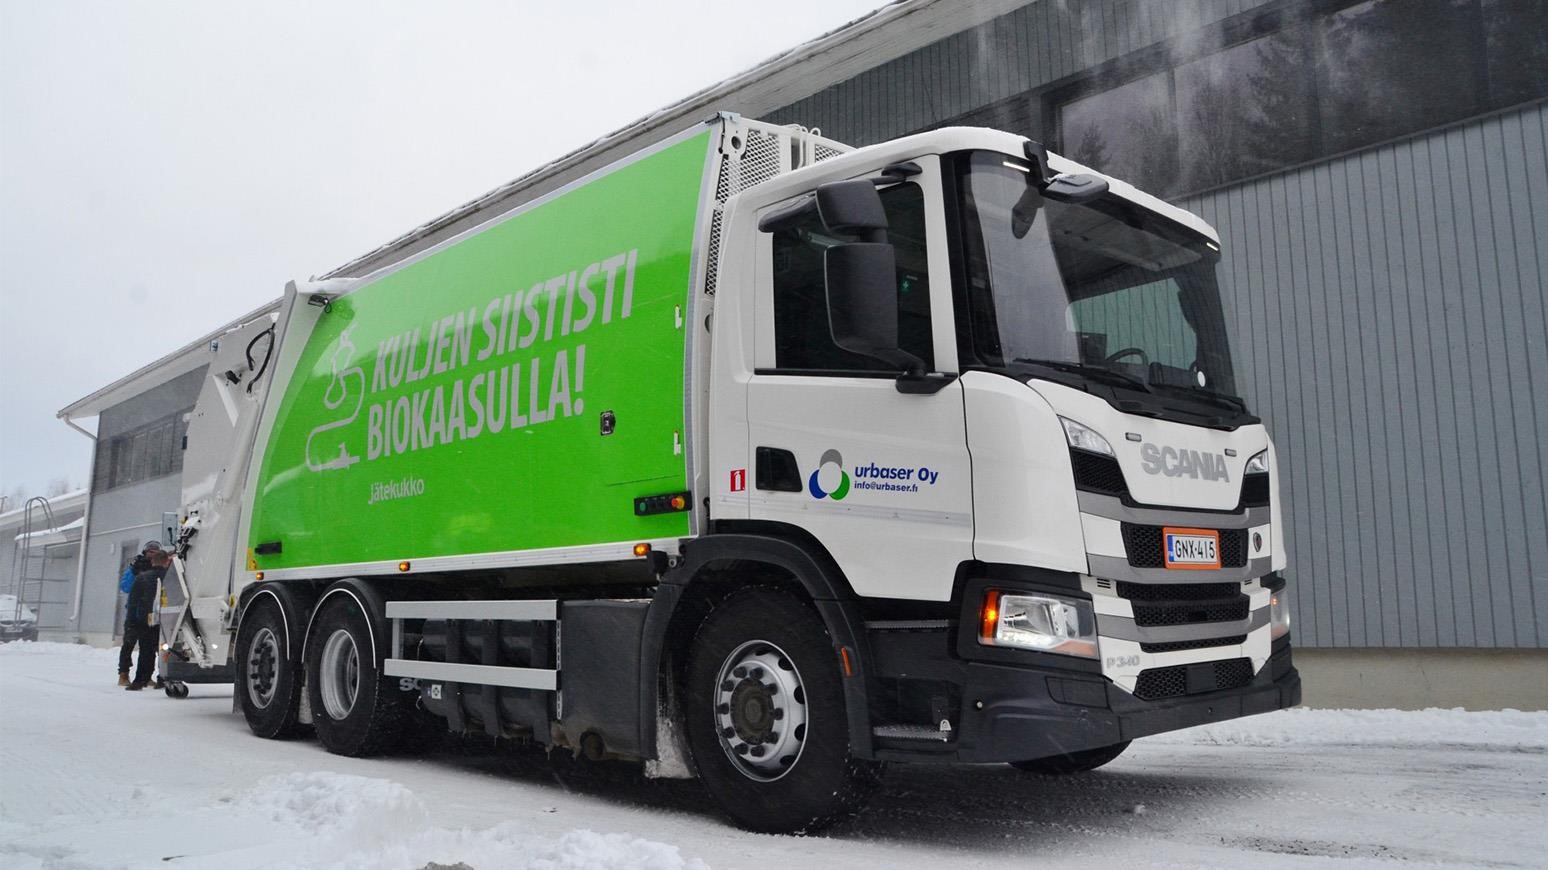 Scania’s Biogas Vehicles Help Urbaser Land Municipal Refuse Collection Contract